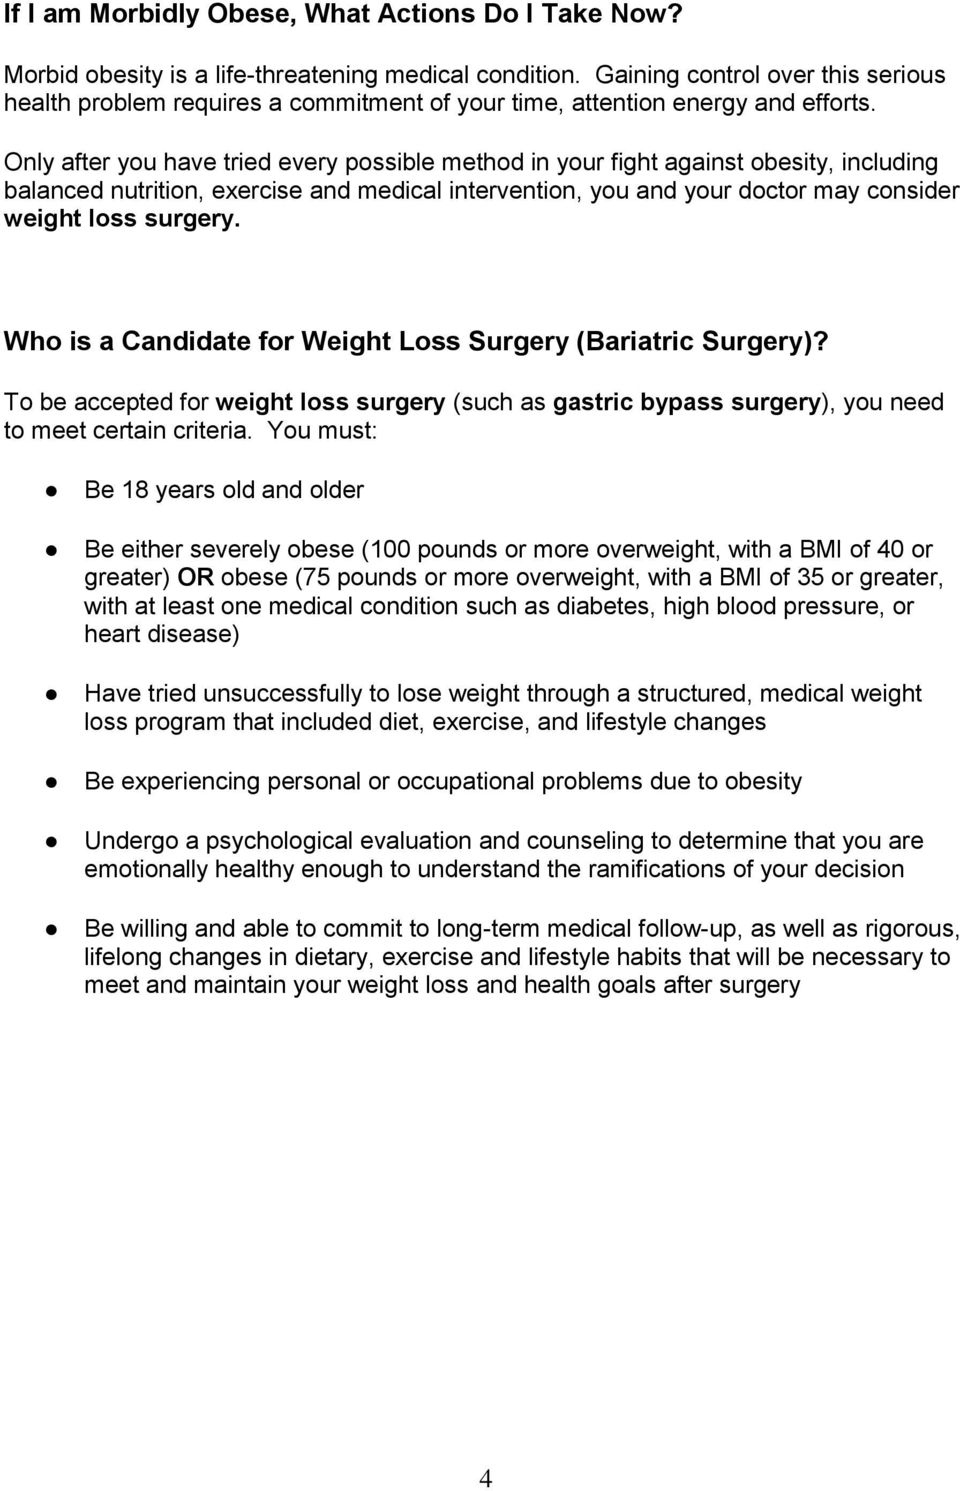 Only after you have tried every possible method in your fight against obesity, including balanced nutrition, exercise and medical intervention, you and your doctor may consider weight loss surgery.